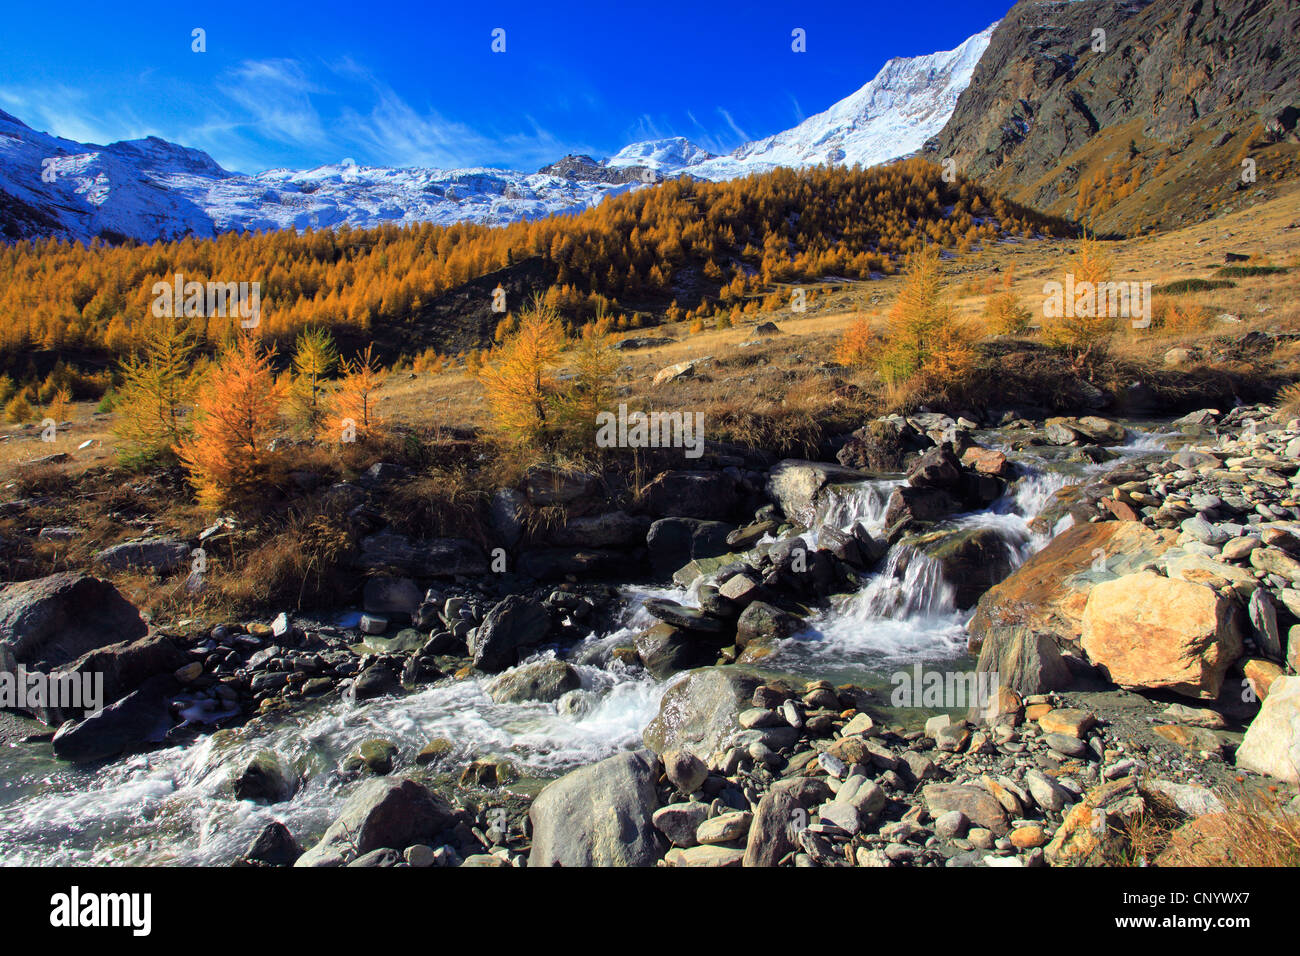 common larch, European larch (Larix decidua, Larix europaea), view through the Saas Valley with mountain brook and larch mountains in autumn colouration in front of snow-covered Mountain range, Switzerland, Valais, Saas Fee Stock Photo